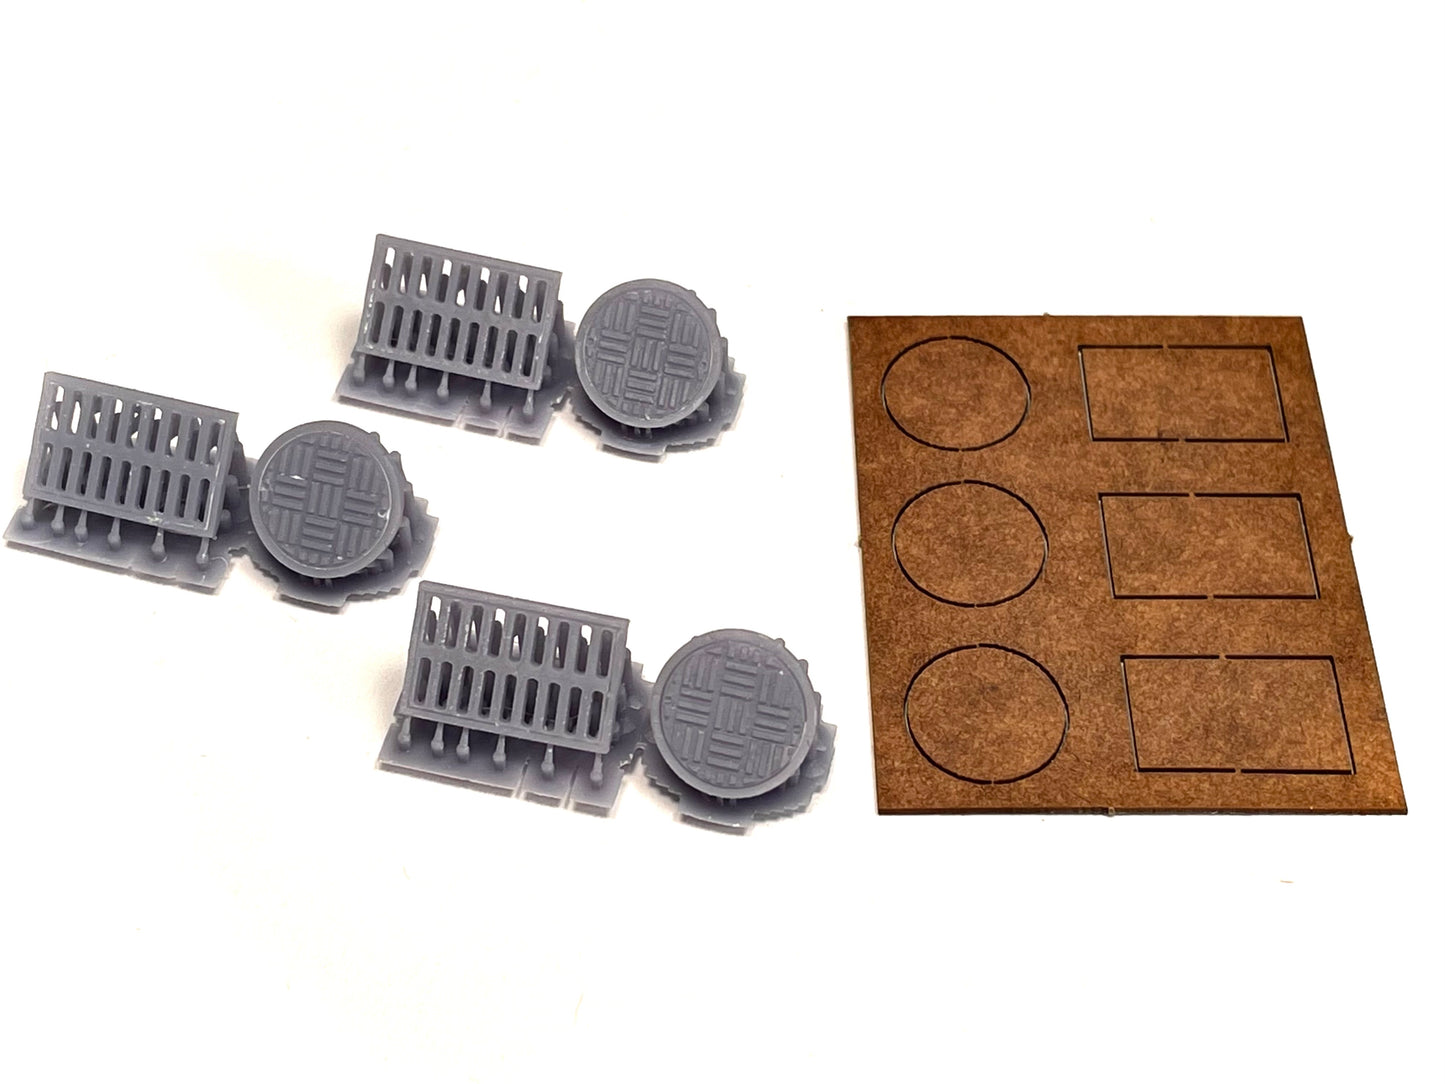 HO Scale- Storm drains and Manhole covers